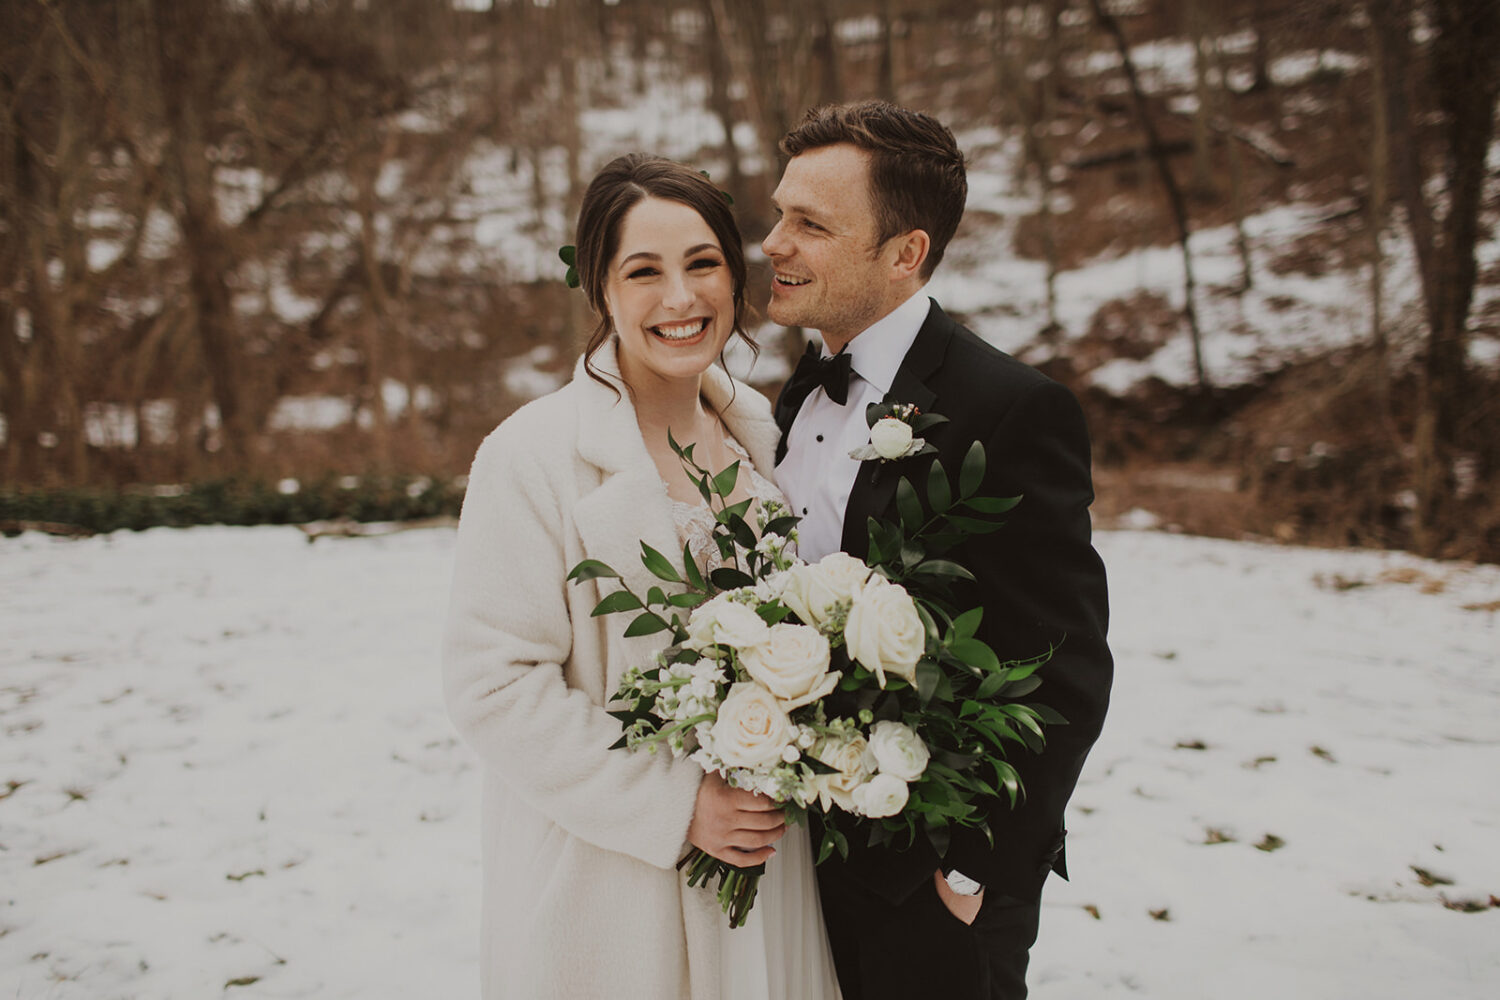 couple embraces at snow-covered elopement